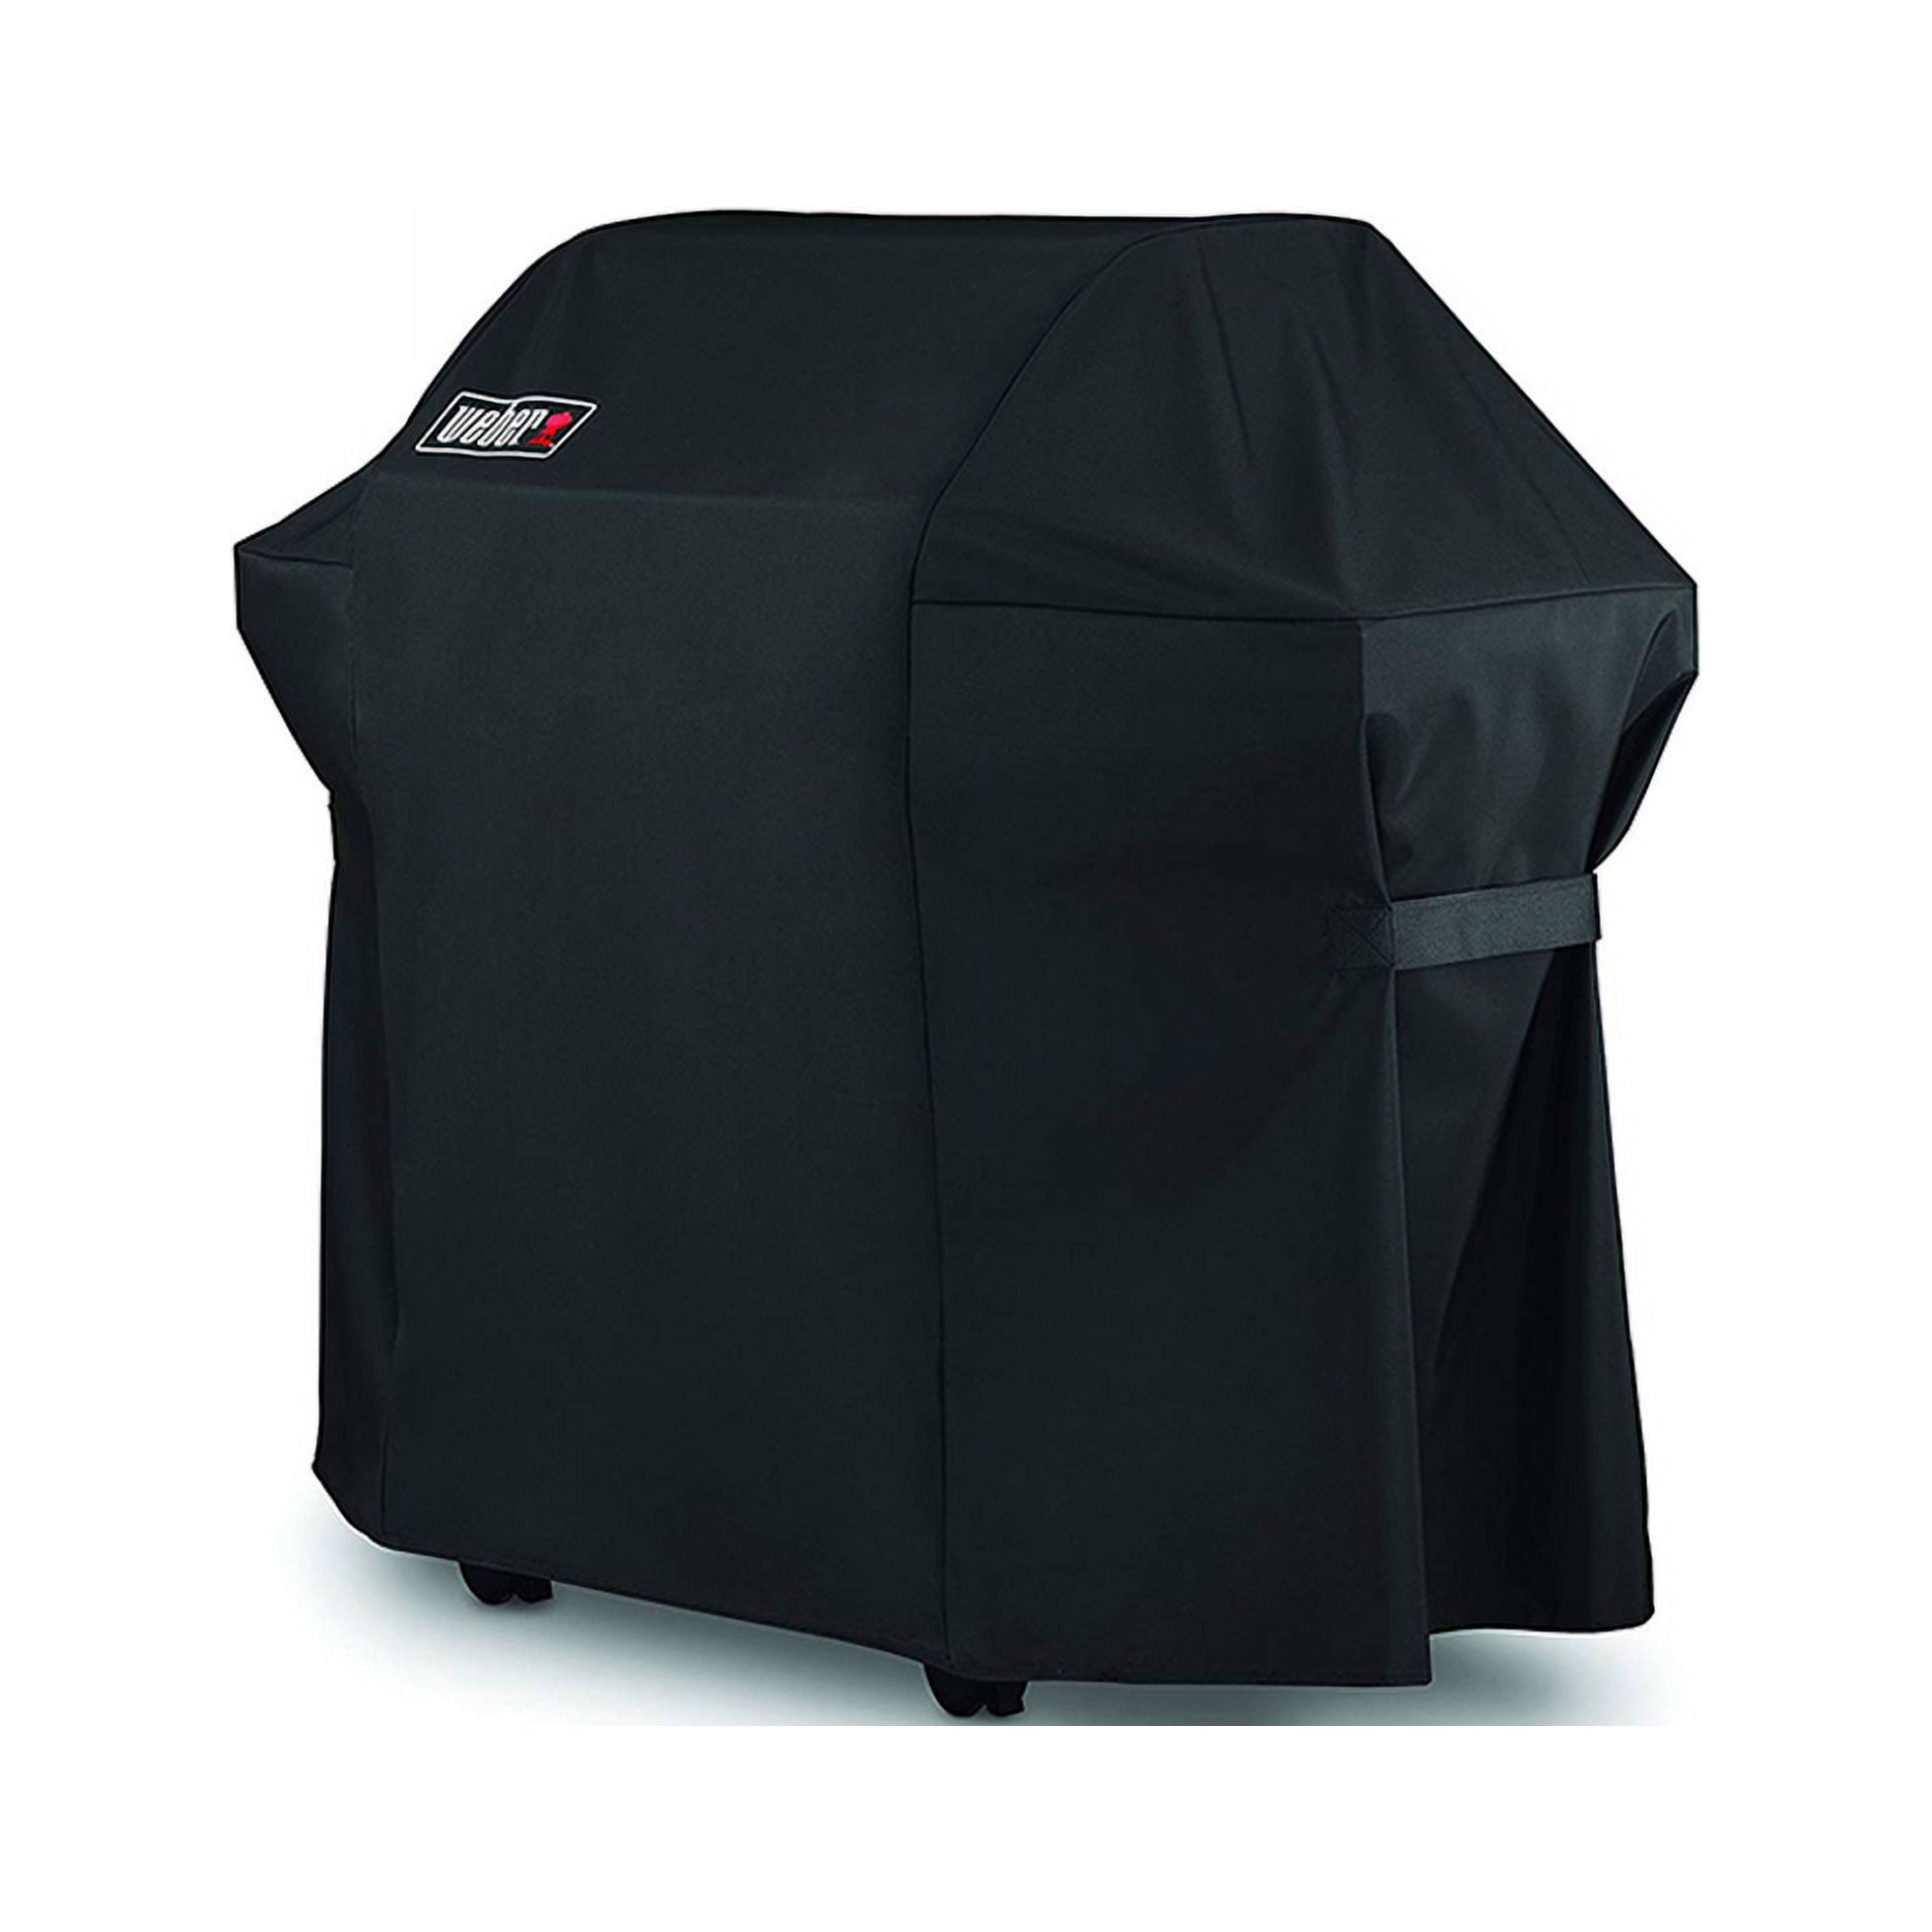 Weber 7106 Grill Cover for Weber Spirit 220 and 300 Series Gas Grills (52 x 26 x 43 inches)Black - image 2 of 7